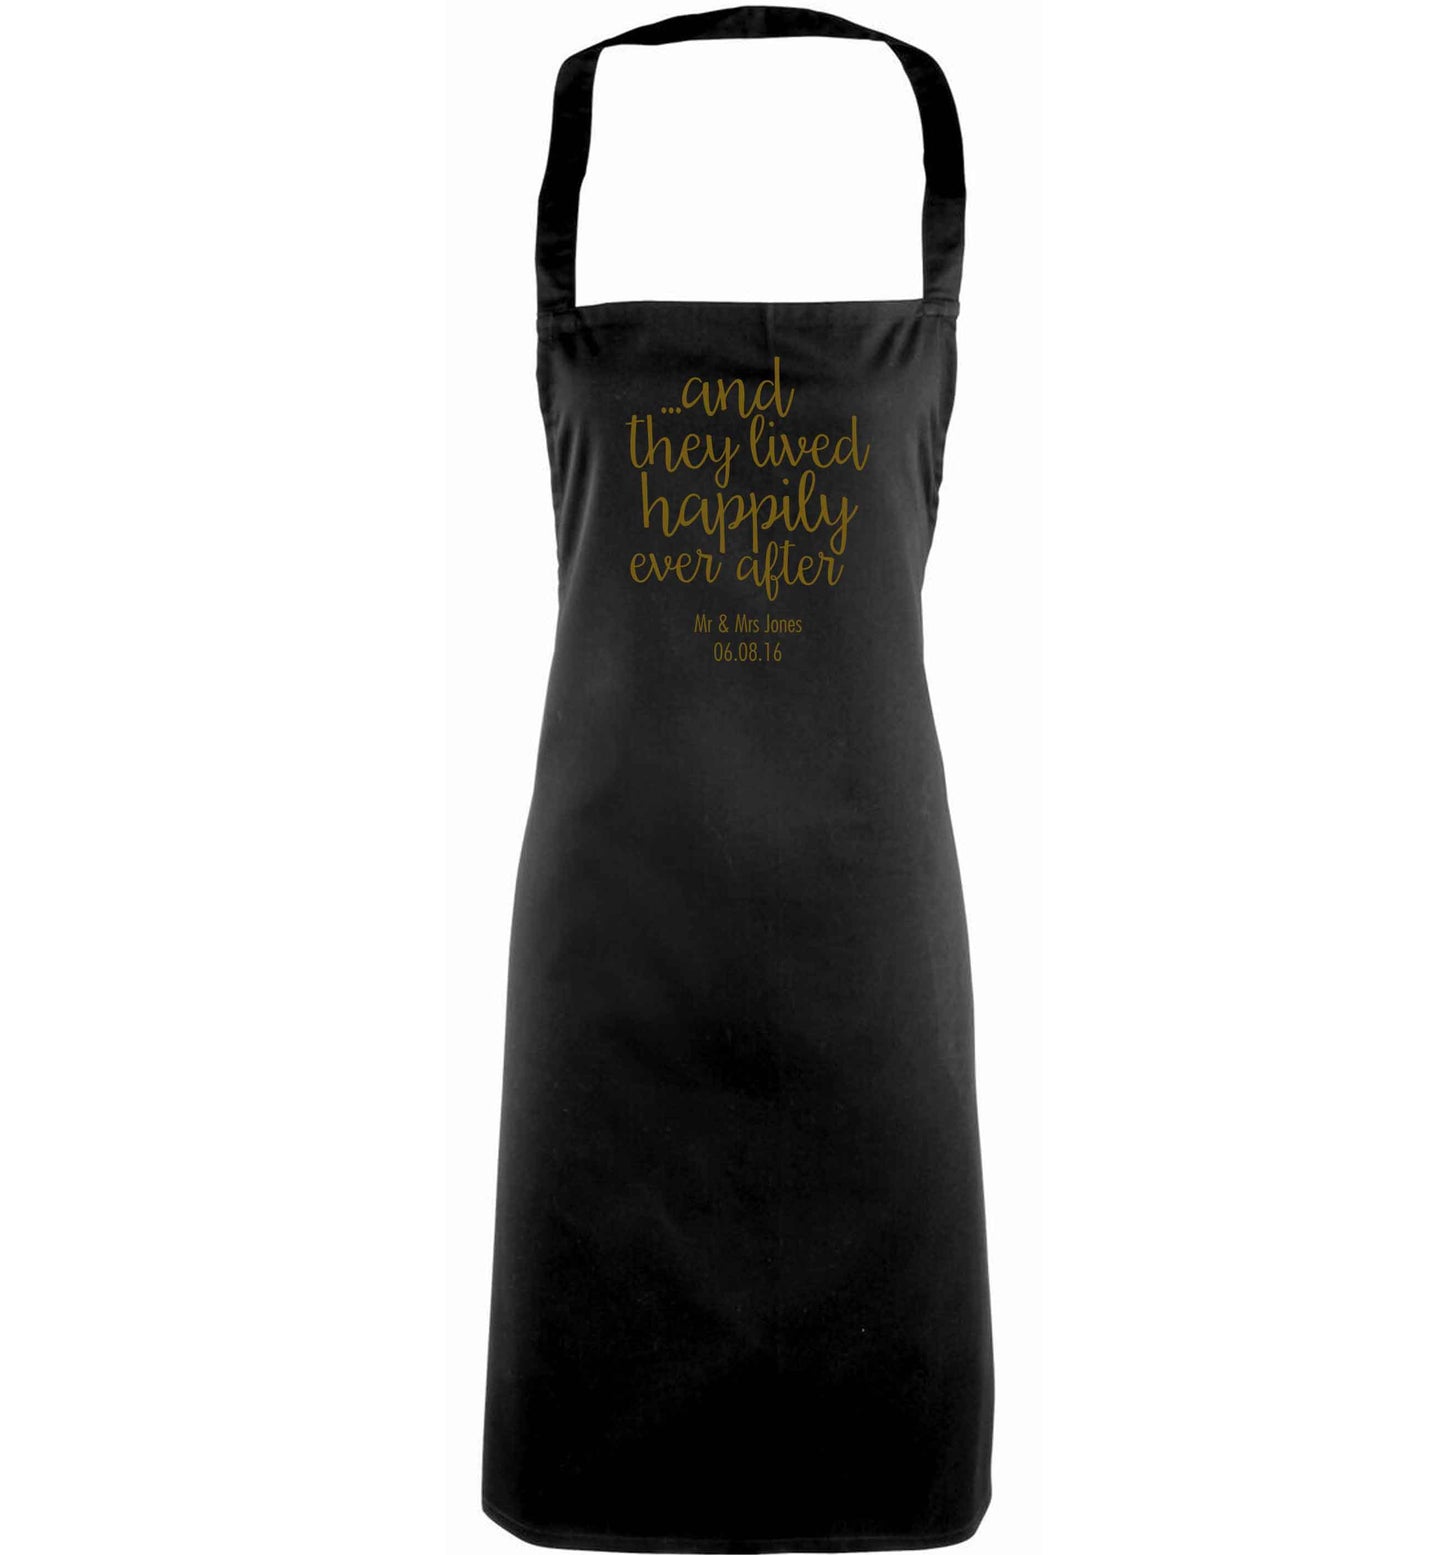 ...and they lived happily ever after - personalised date and names adults black apron